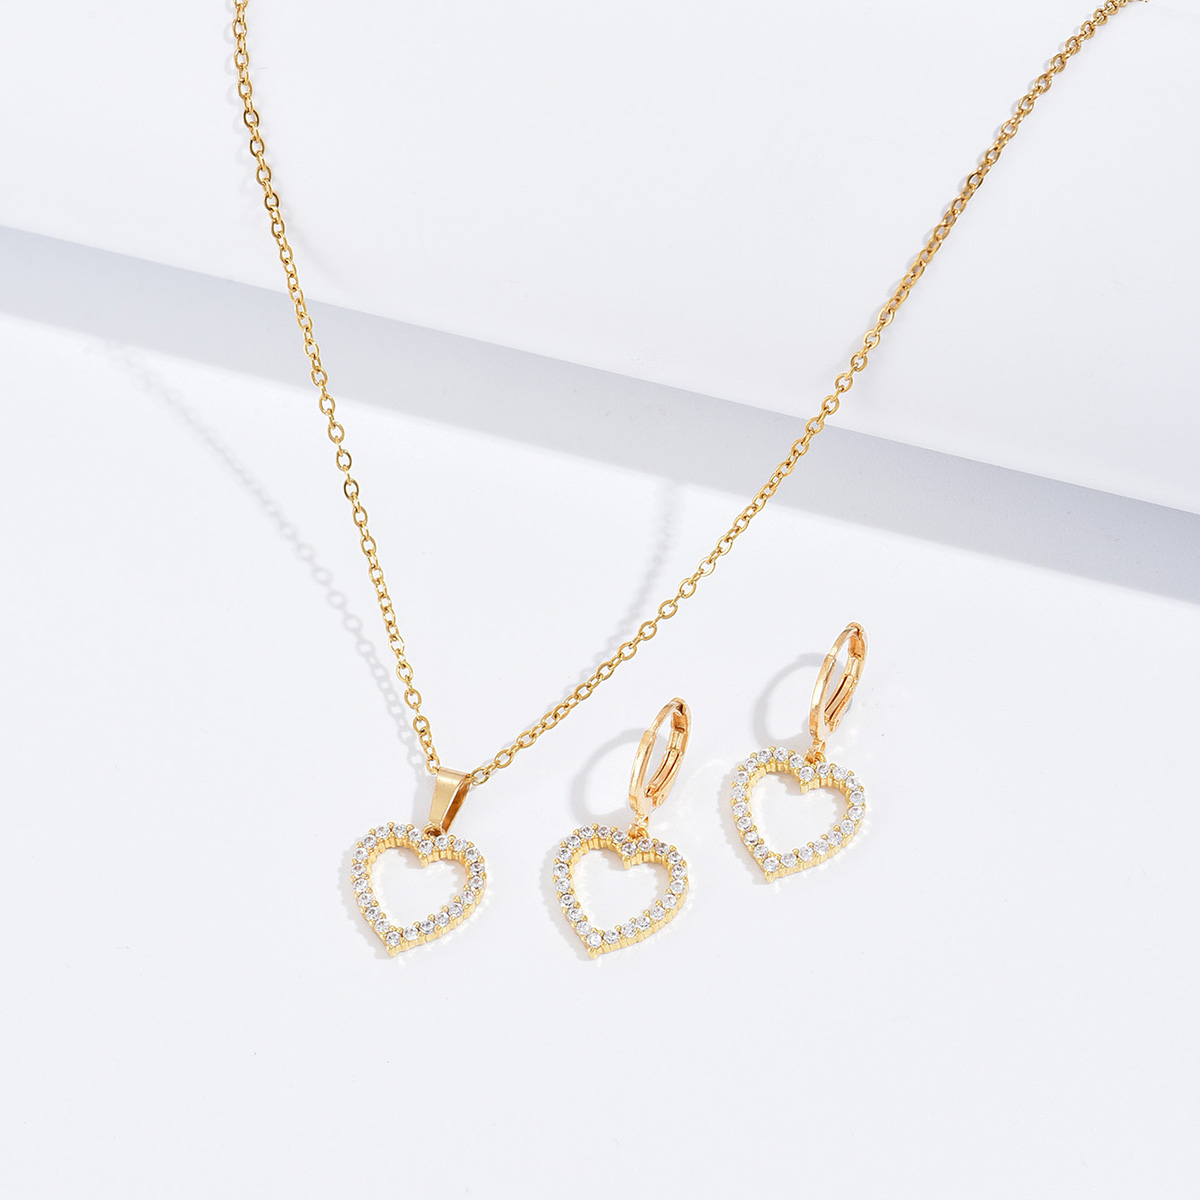 GCJ382 Love heart Necklace and Drop Earring Set (4)